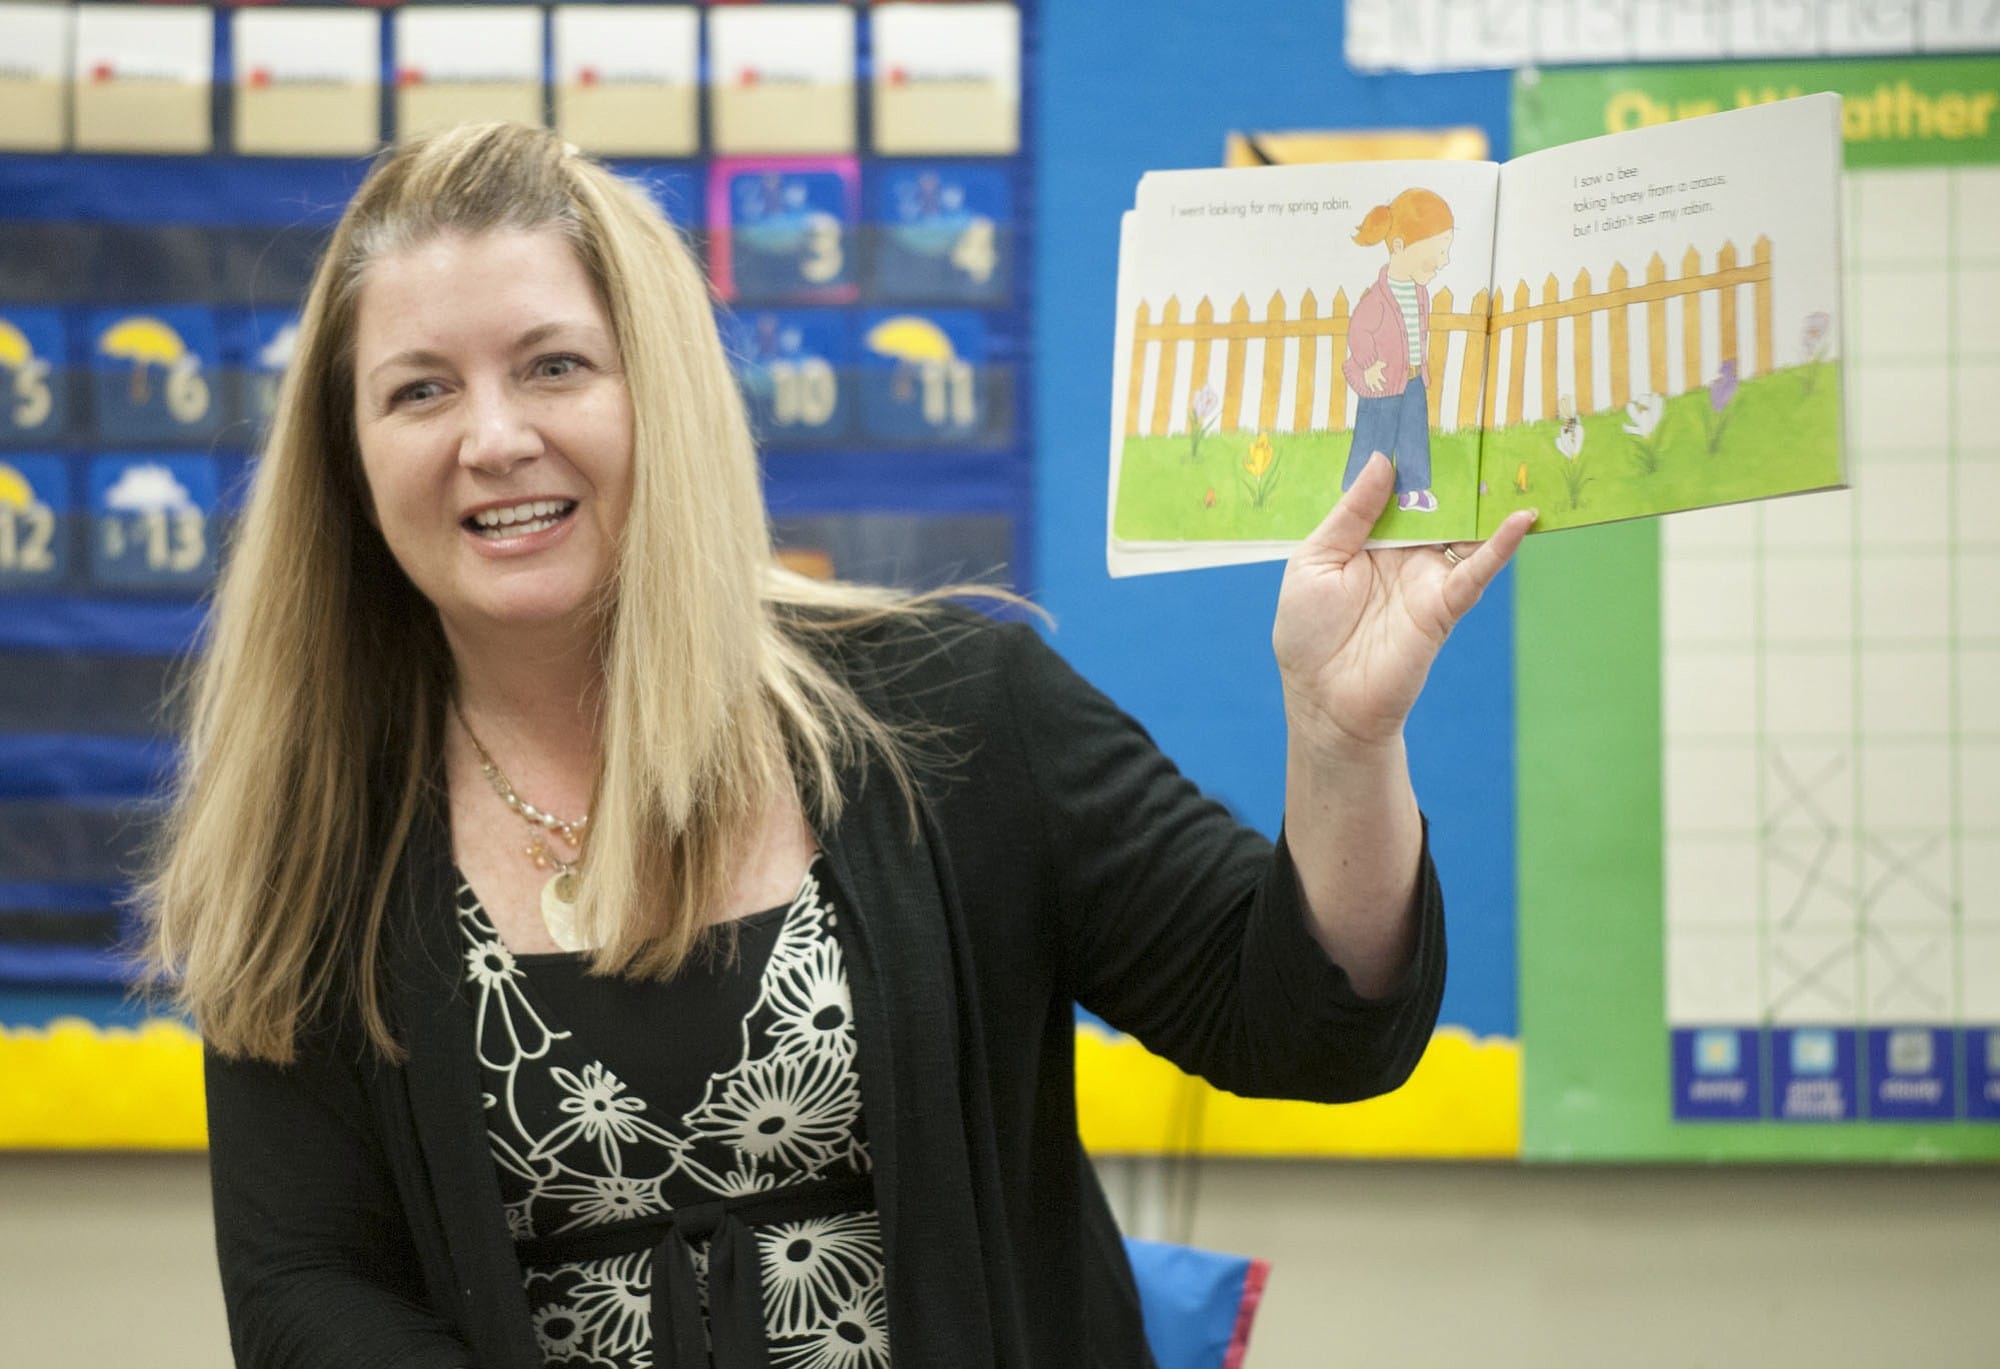 Jodie Brusseau teaches all-day kindergarten at Riverview Elementary in Evergreen Public Schools. Her district was the first in Clark County to implement tuition-free, all-day kindergarten district-wide.